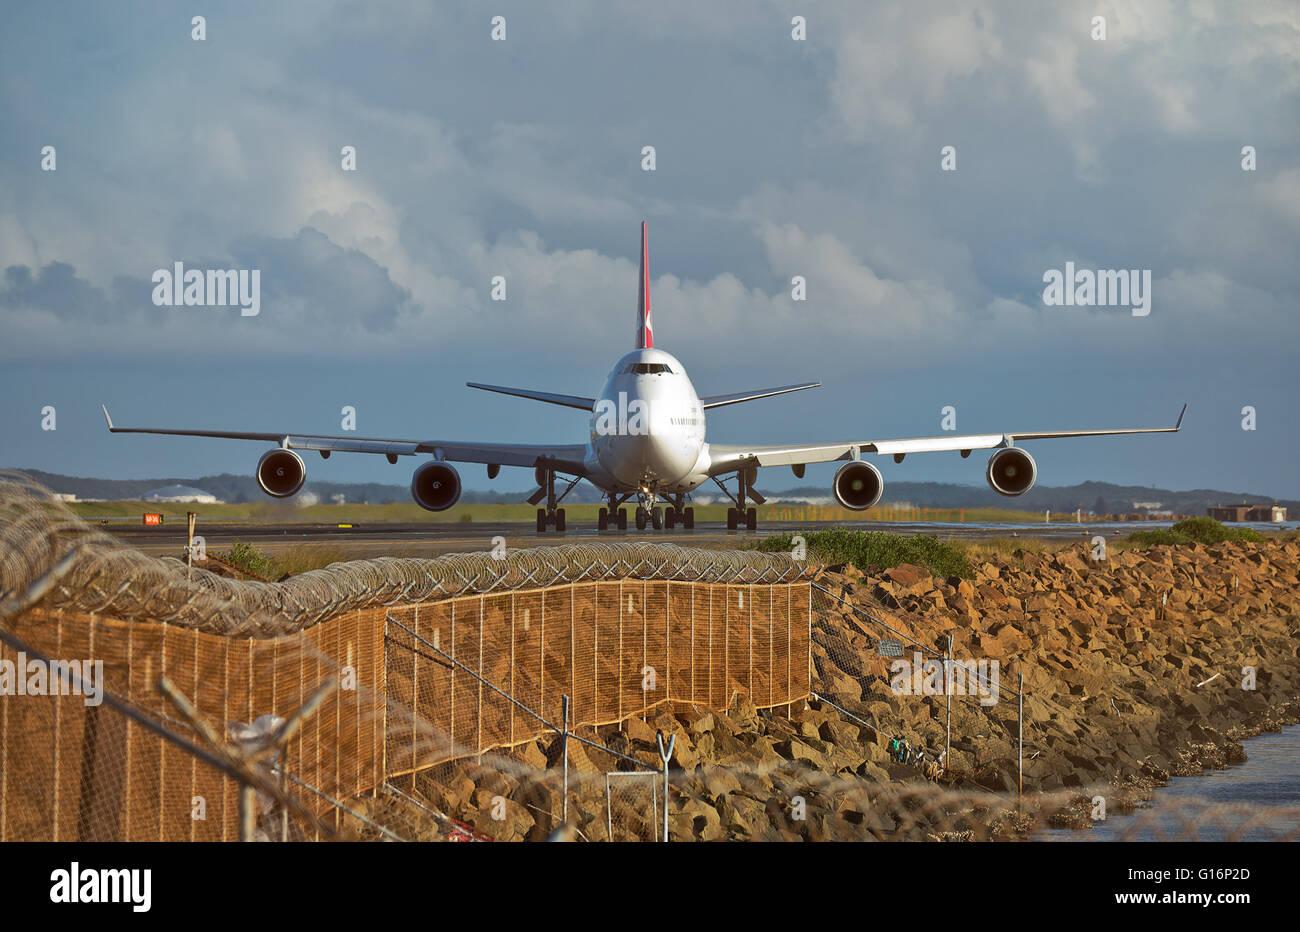 A QANTAS Boeing 747-400 taxis towards the terminal after landing at the city's airport. Stock Photo